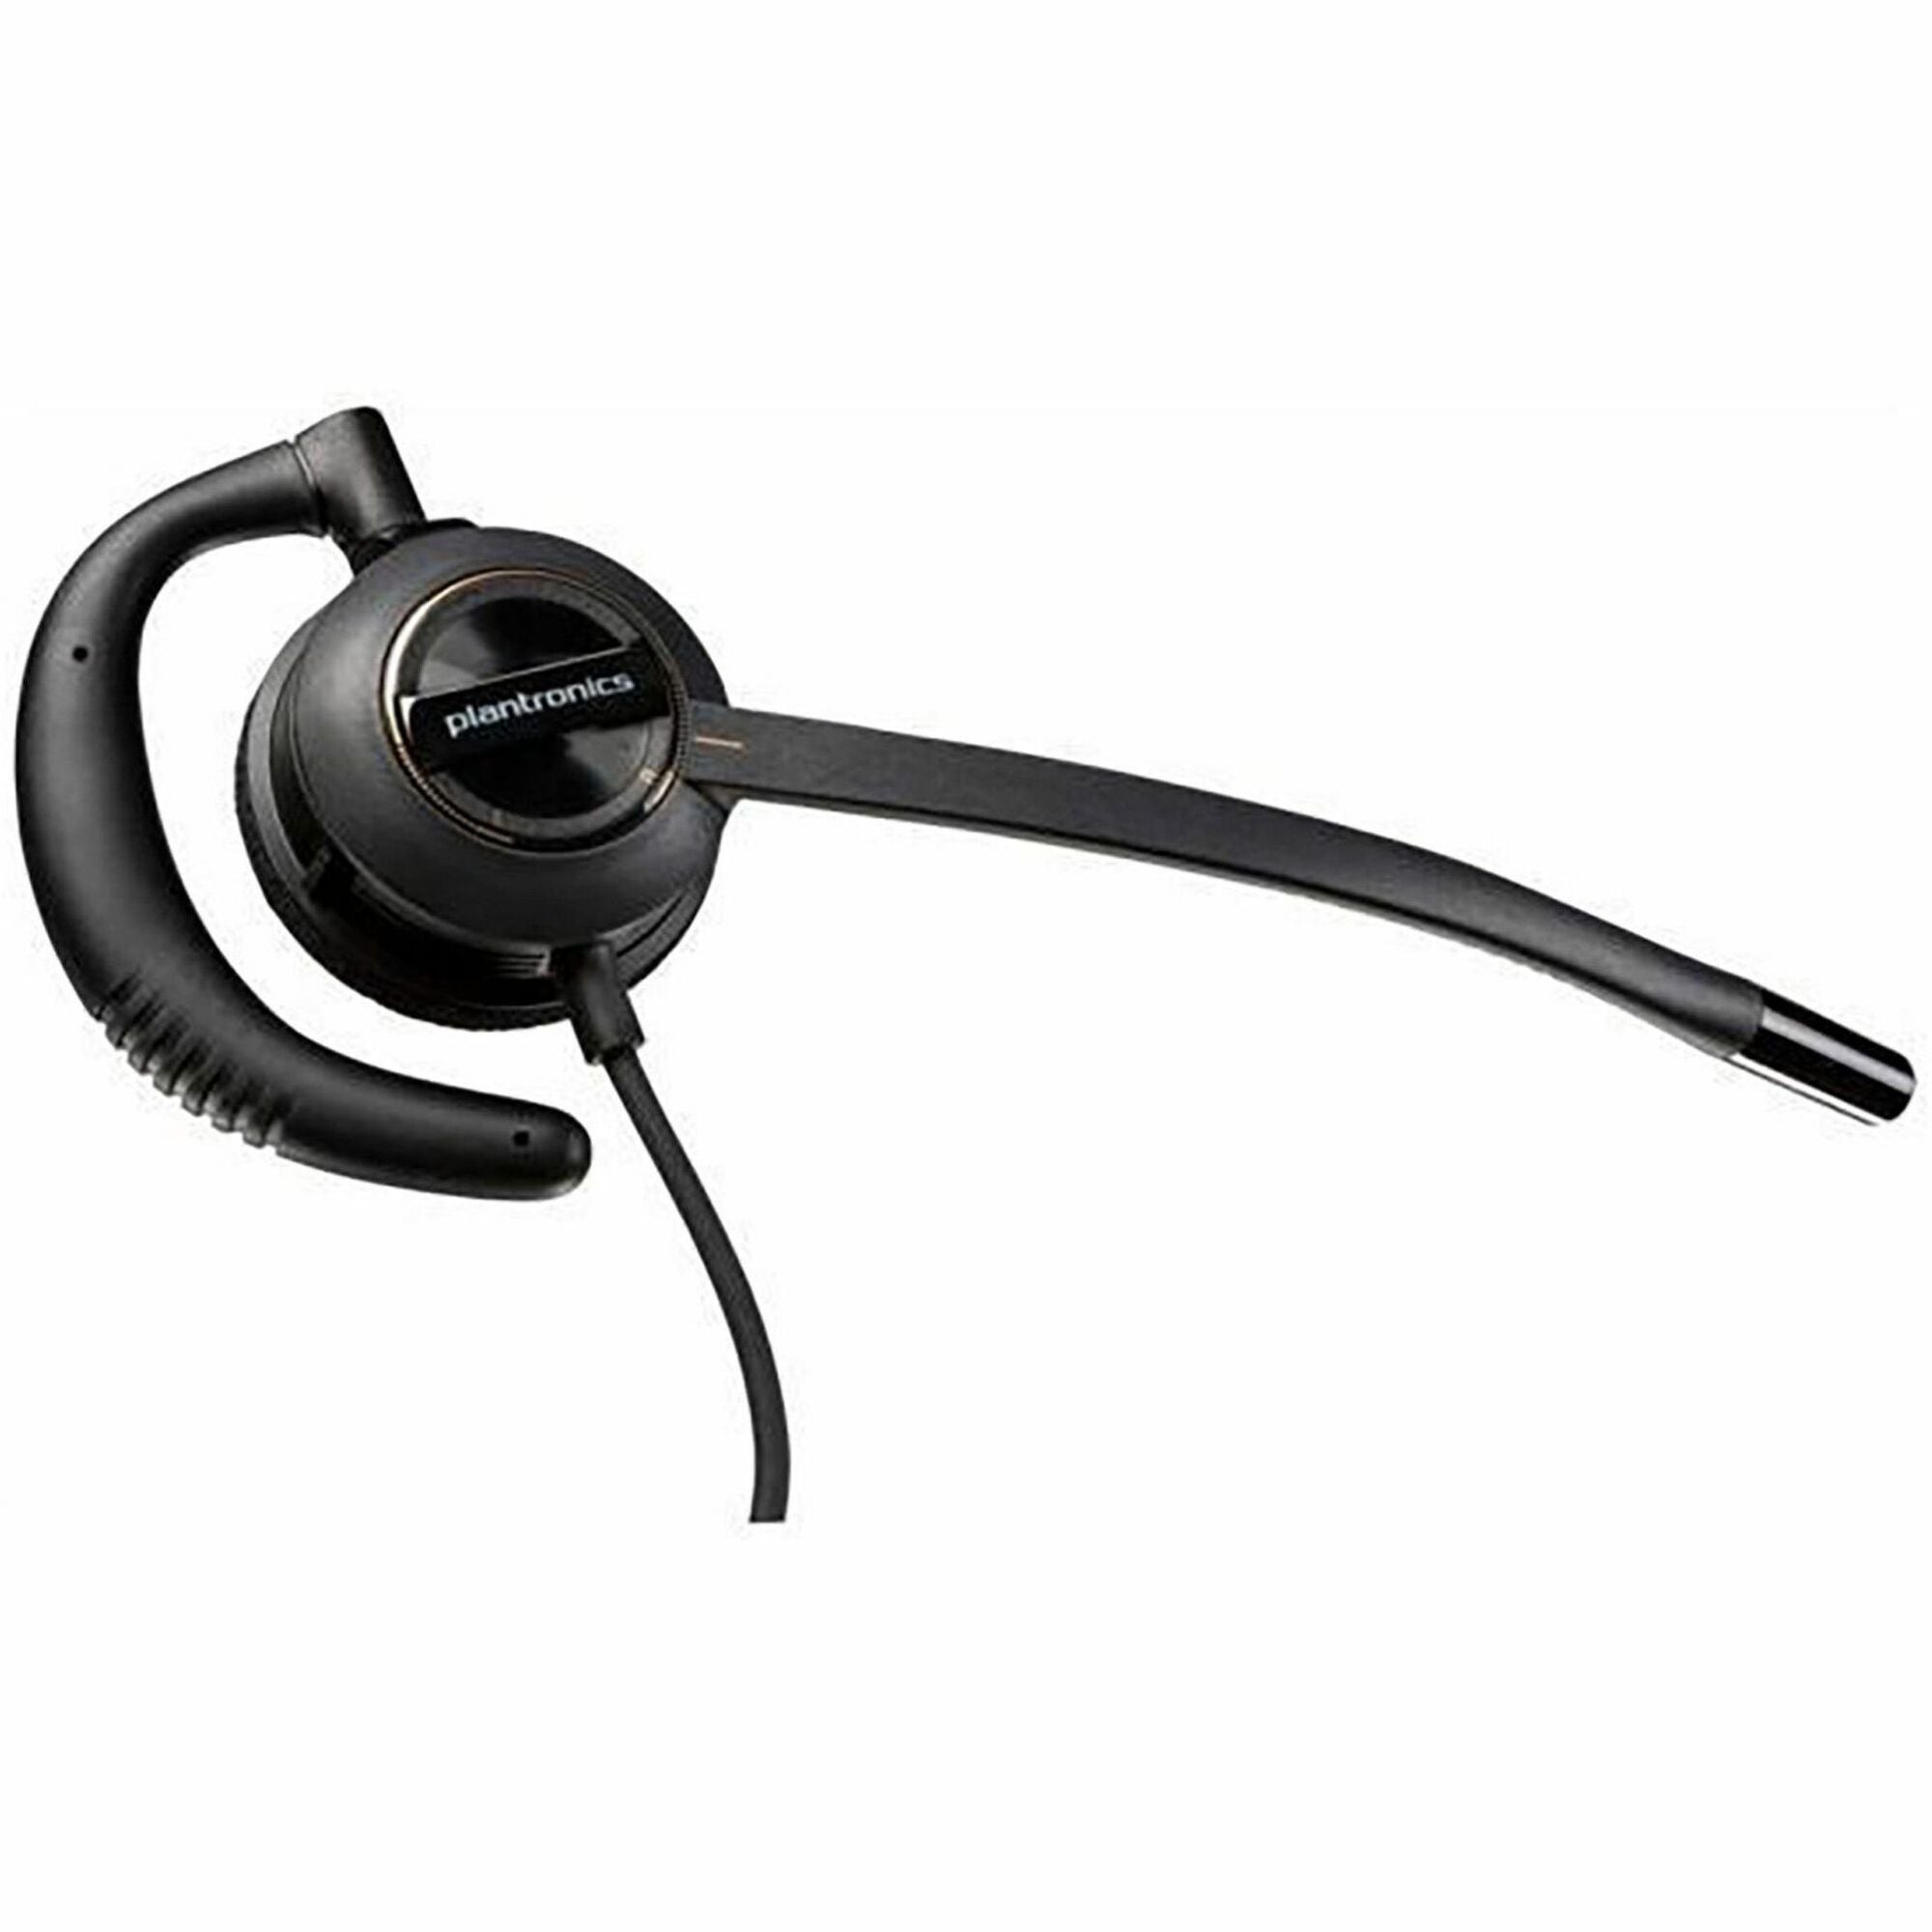 poly-encorepro-hw530-quick-disconnect-headset-mono-mini-phone-35mm-wired-20-hz-16-khz-on-ear-monaural-ear-cup-292-ft-cable-omni-directional-noise-cancelling-microphone-black_hew783p2aa - 1